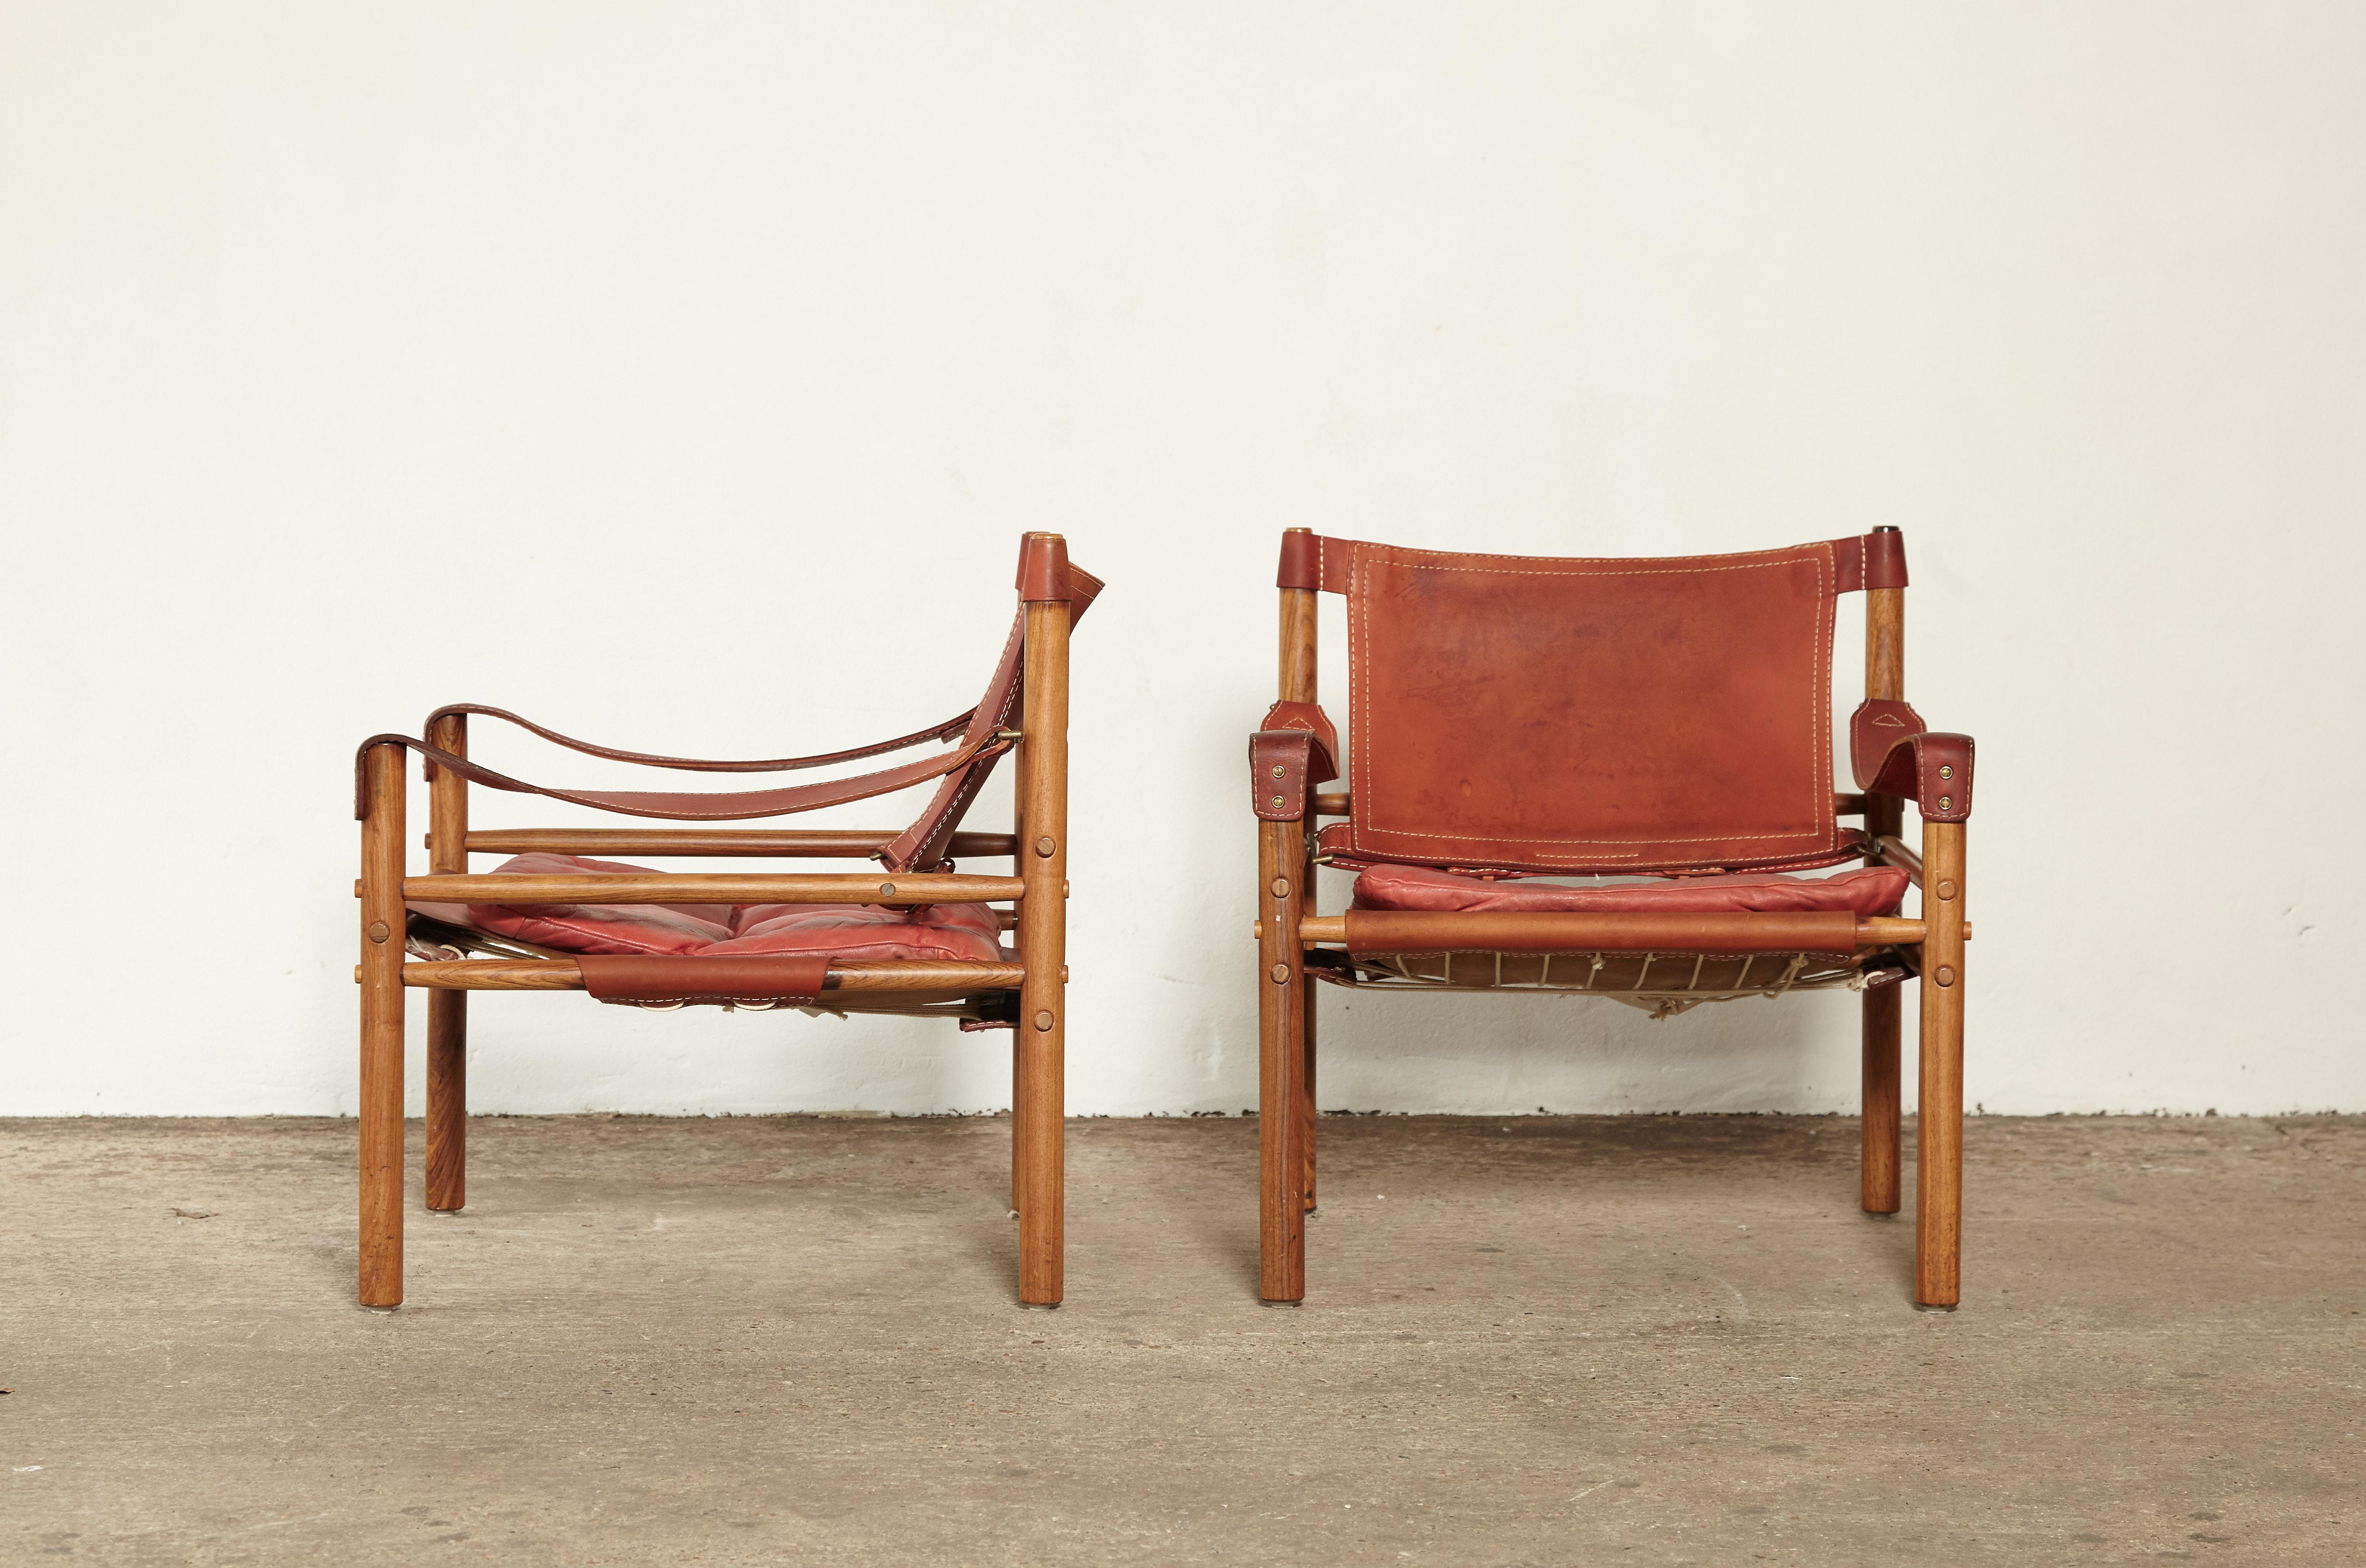 A super pair of authentic vintage Arne Norell safari sirocco chair in rosewood and rare red leather. Good vintage condition with some fading to frames and marks to leather. Made by Norell Mobler in Sweden.

Ships worldwide. The chairs will need to